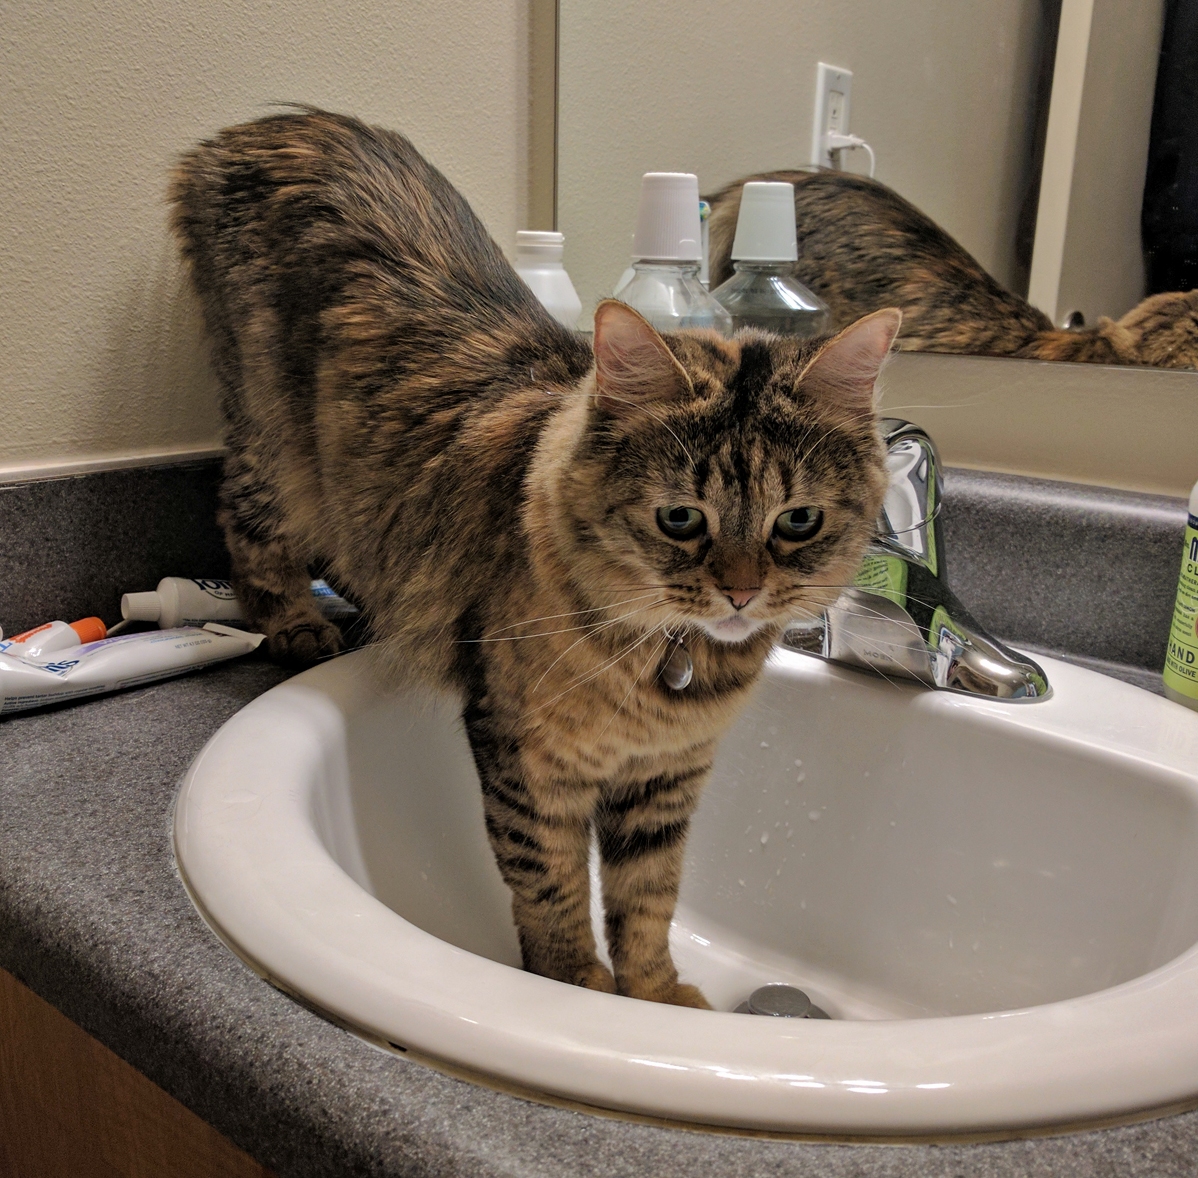 Catsink.exe has stopped working